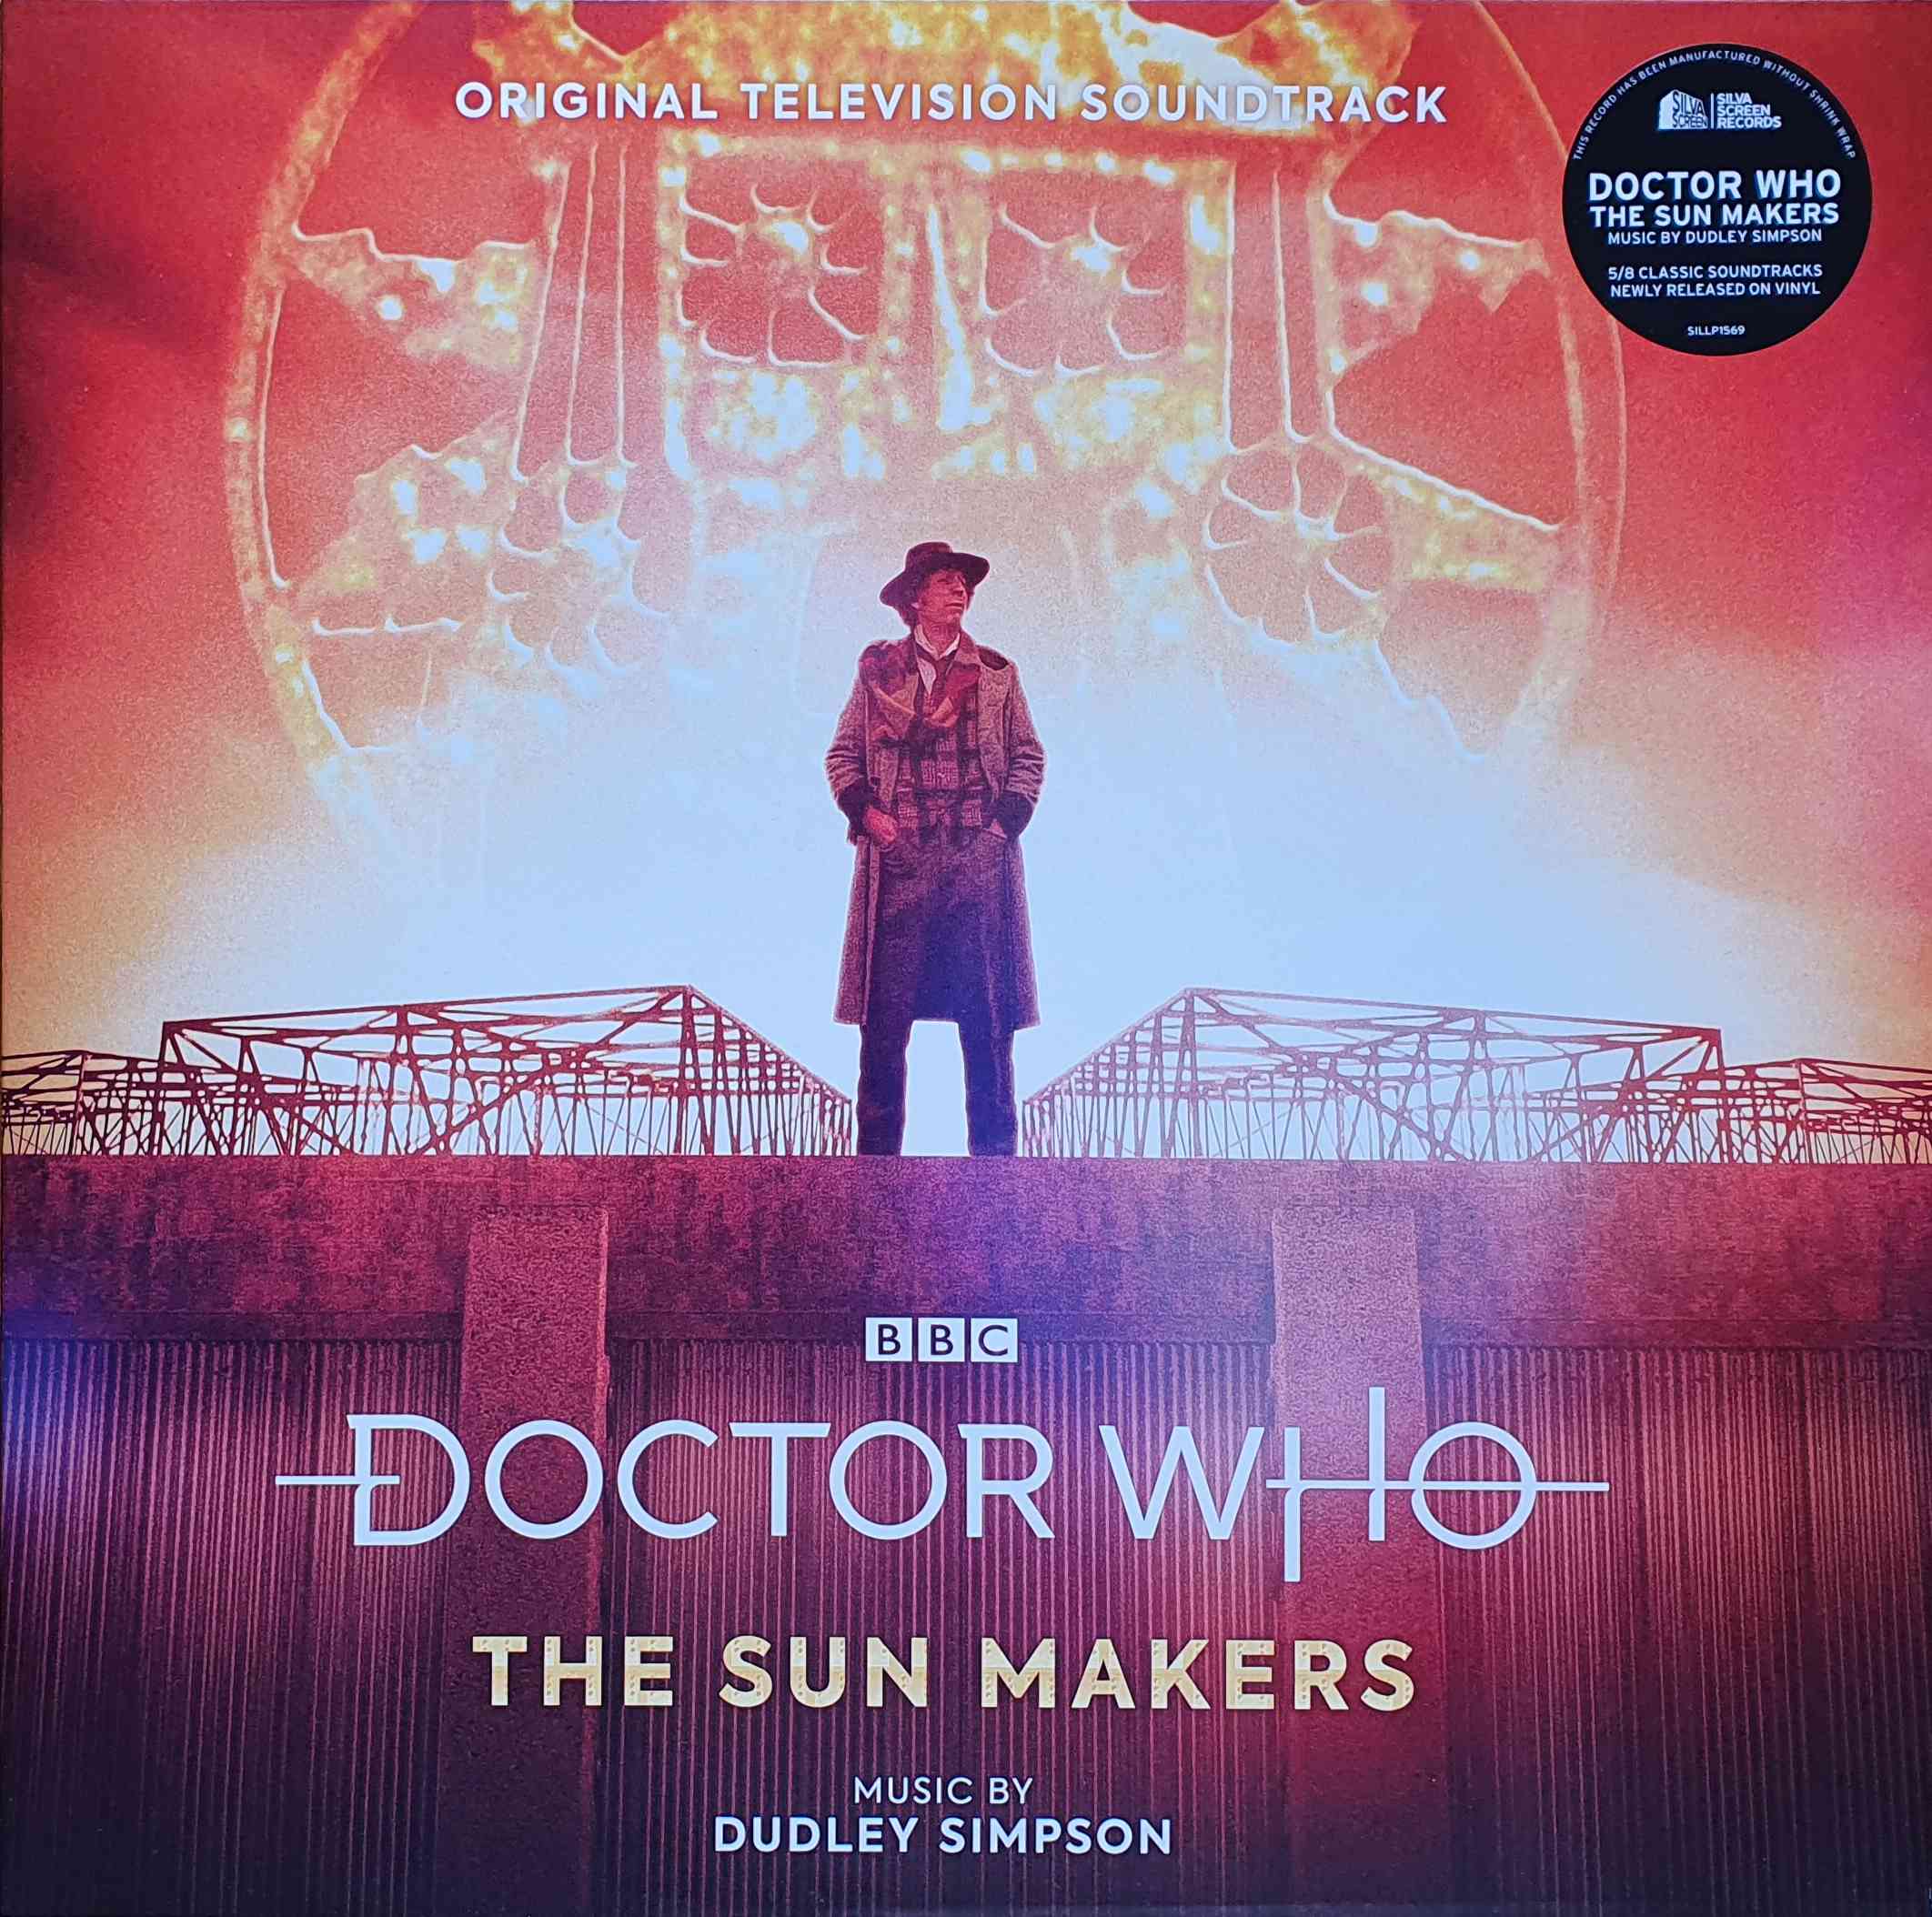 Picture of SILLP 1569 Doctor Who - The sun makers by artist Dudley Simpson from the BBC records and Tapes library